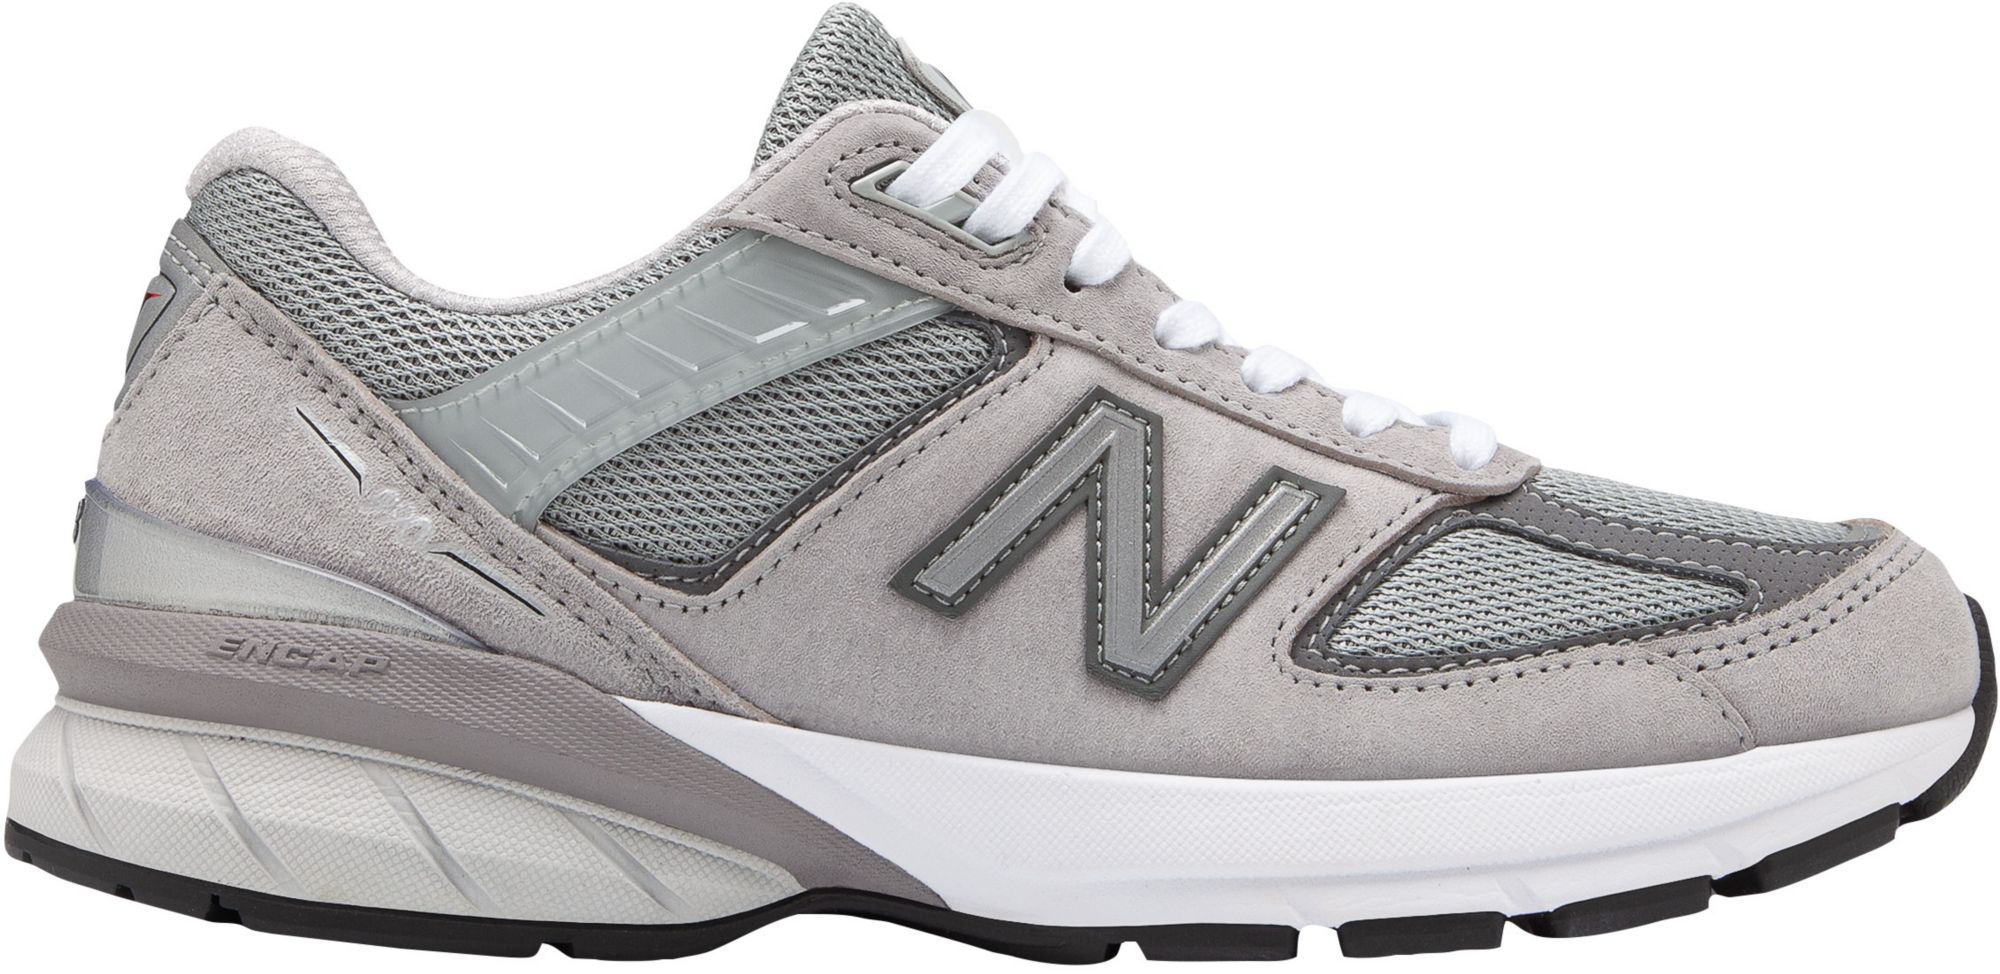 Sneaker Obsession: Gray New Balance Shoes for Your Naughty Side